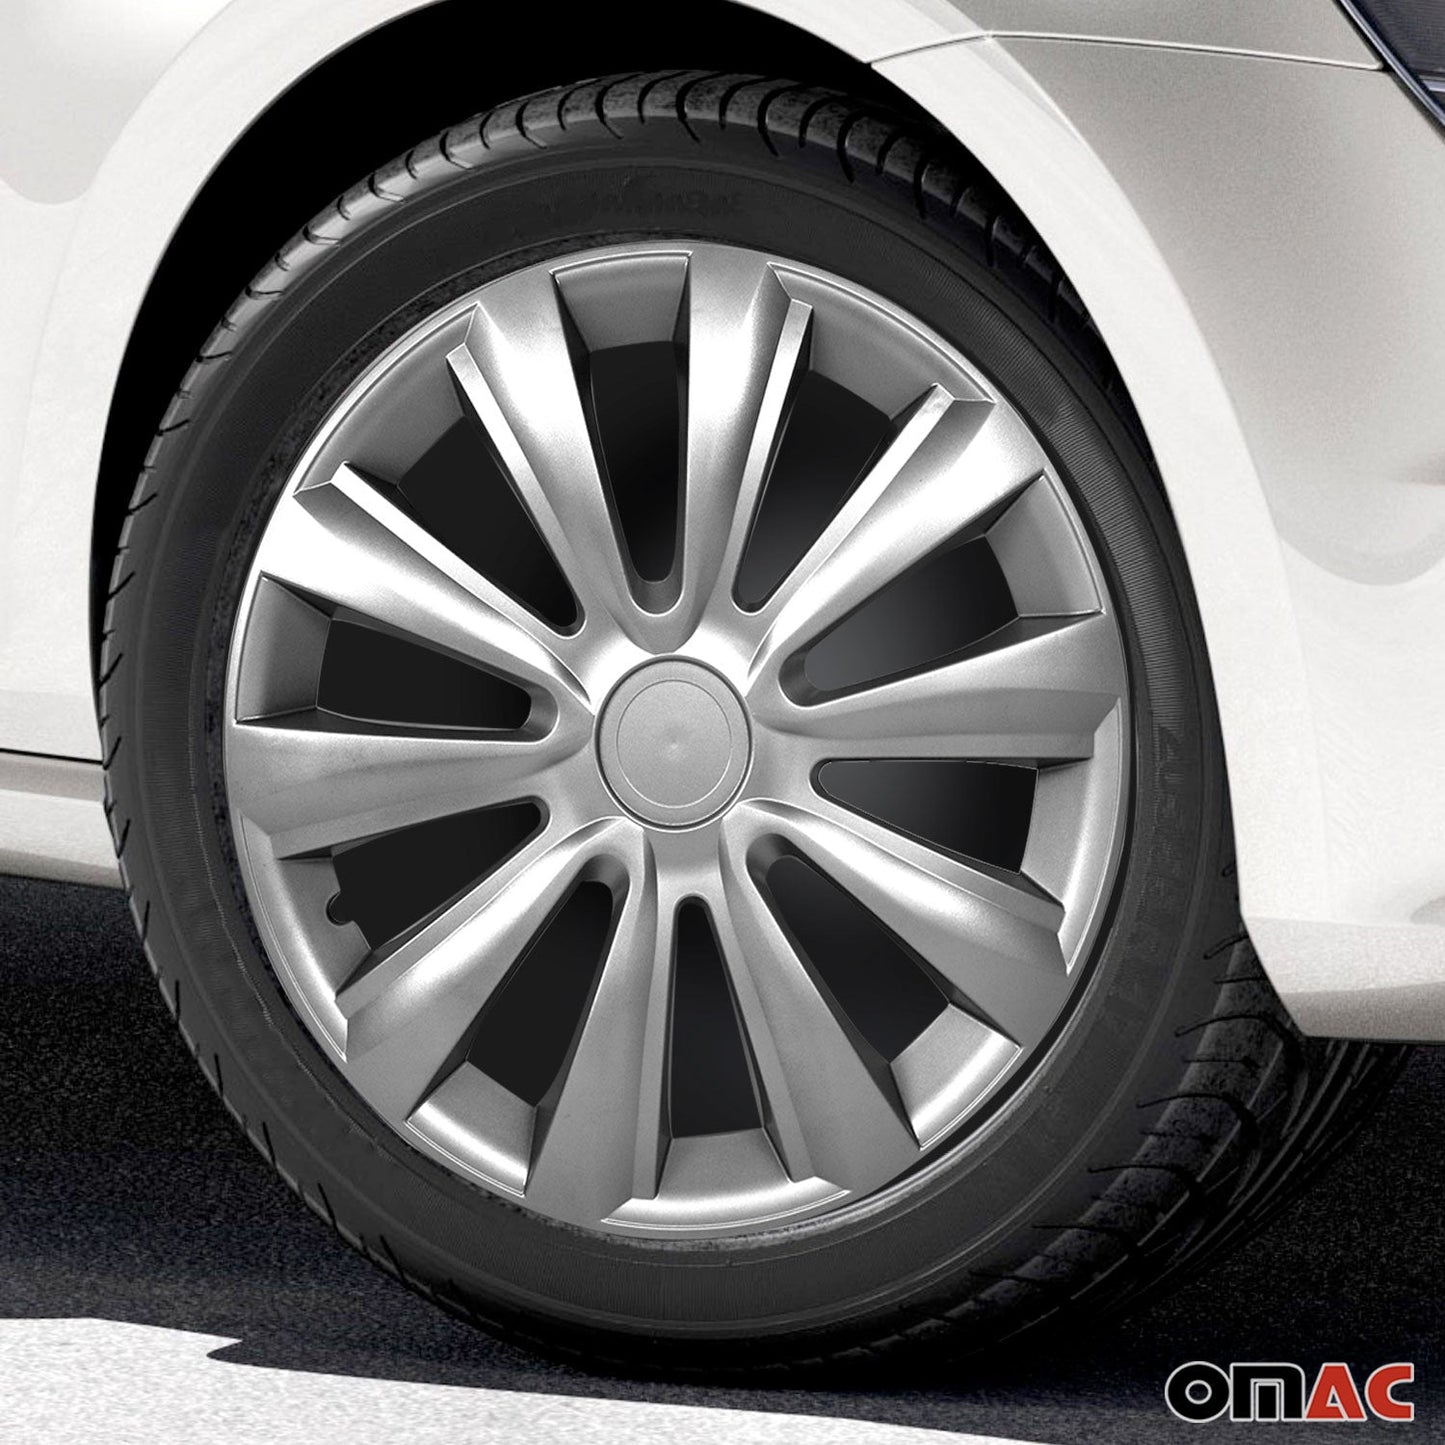 OMAC 16 Inch Wheel Covers Hubcaps for Kia Silver Gray Gloss G002342